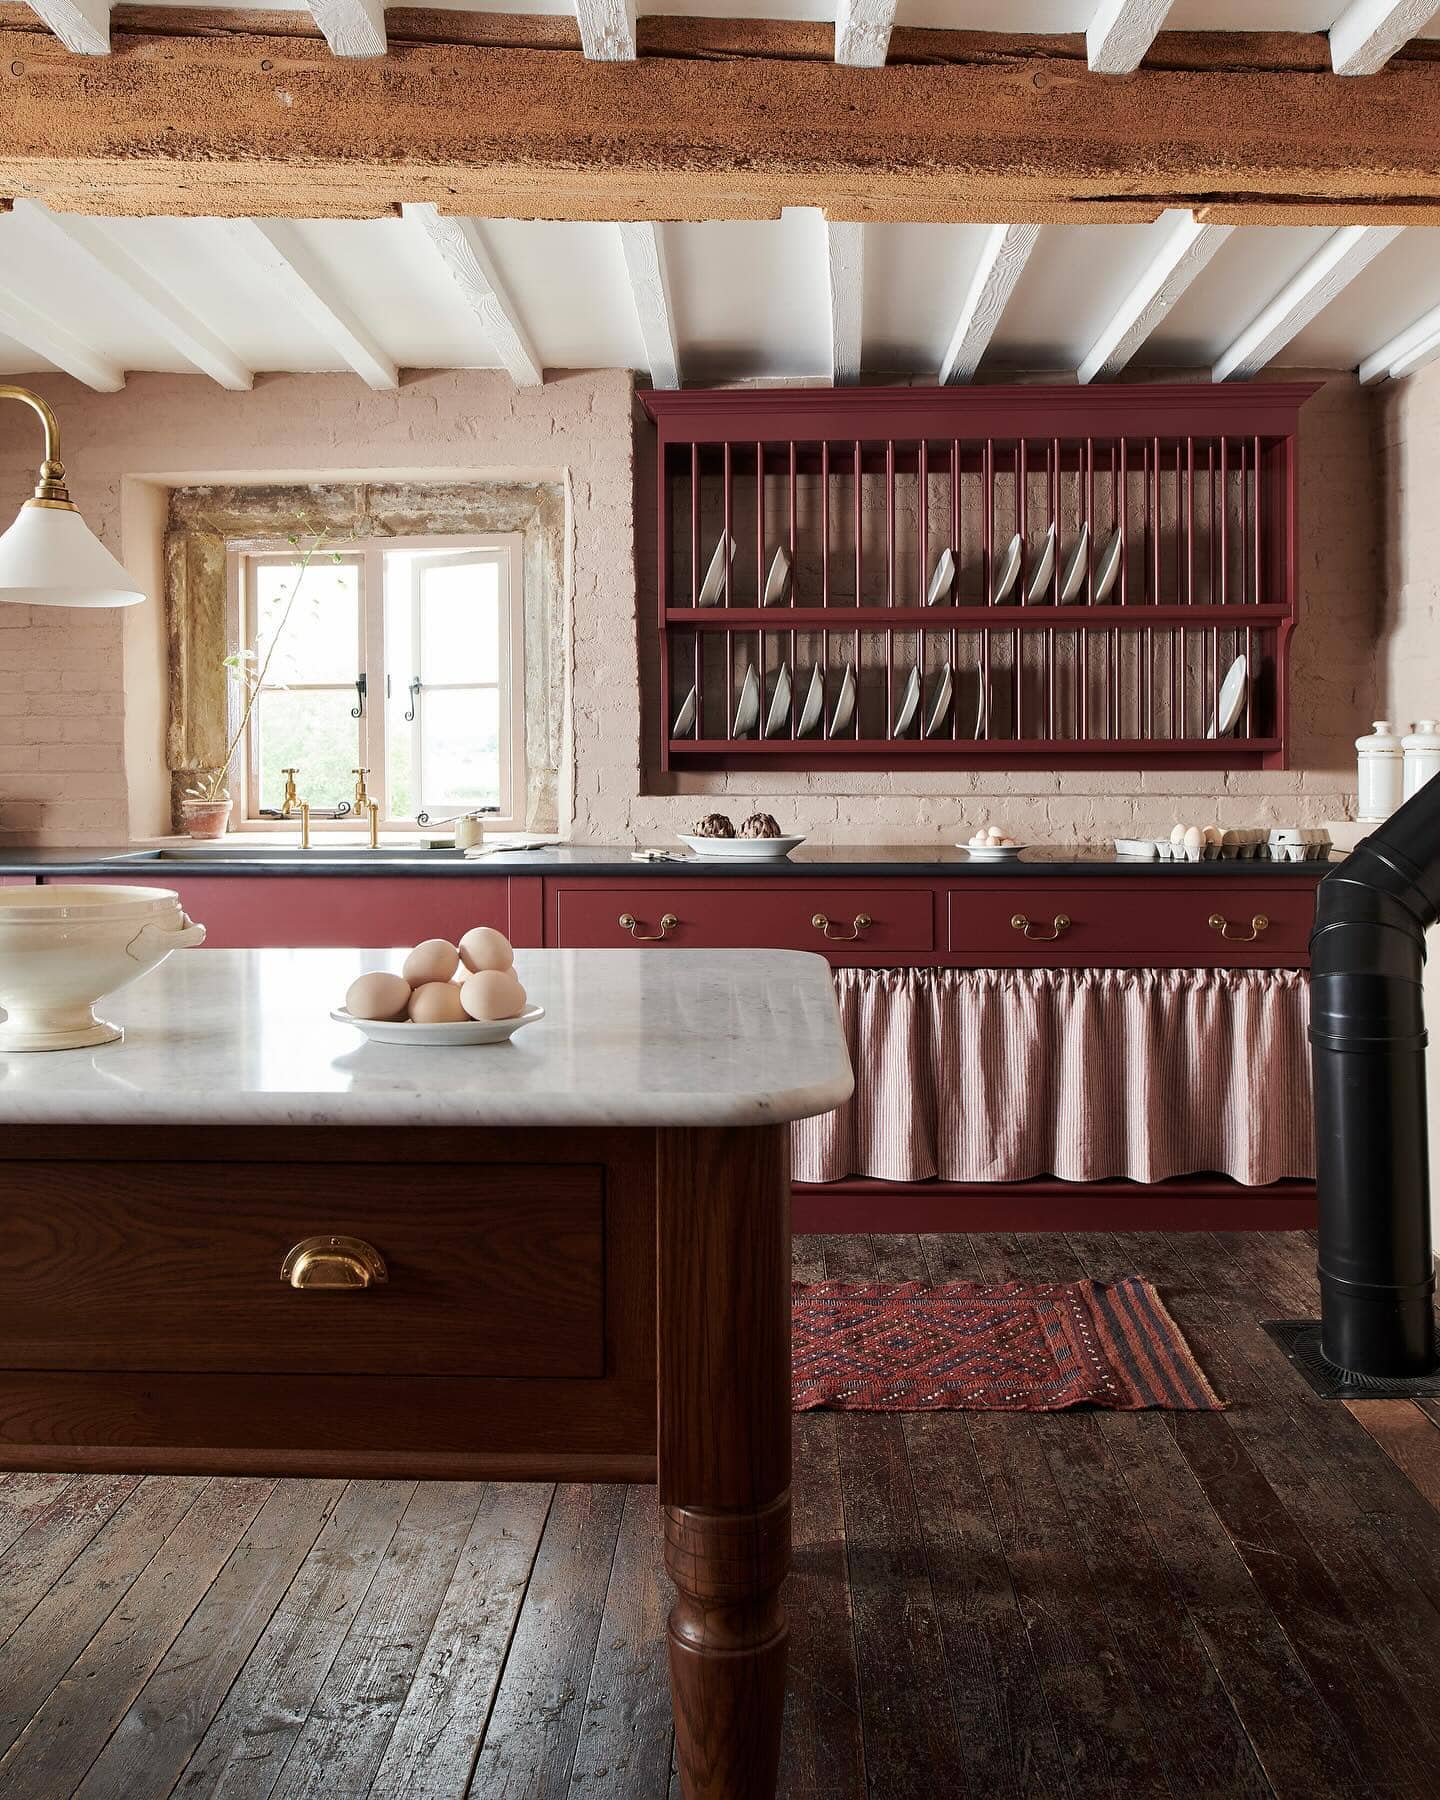 Timeless allure of old homes example showcasing a traditional kitchen in red tones